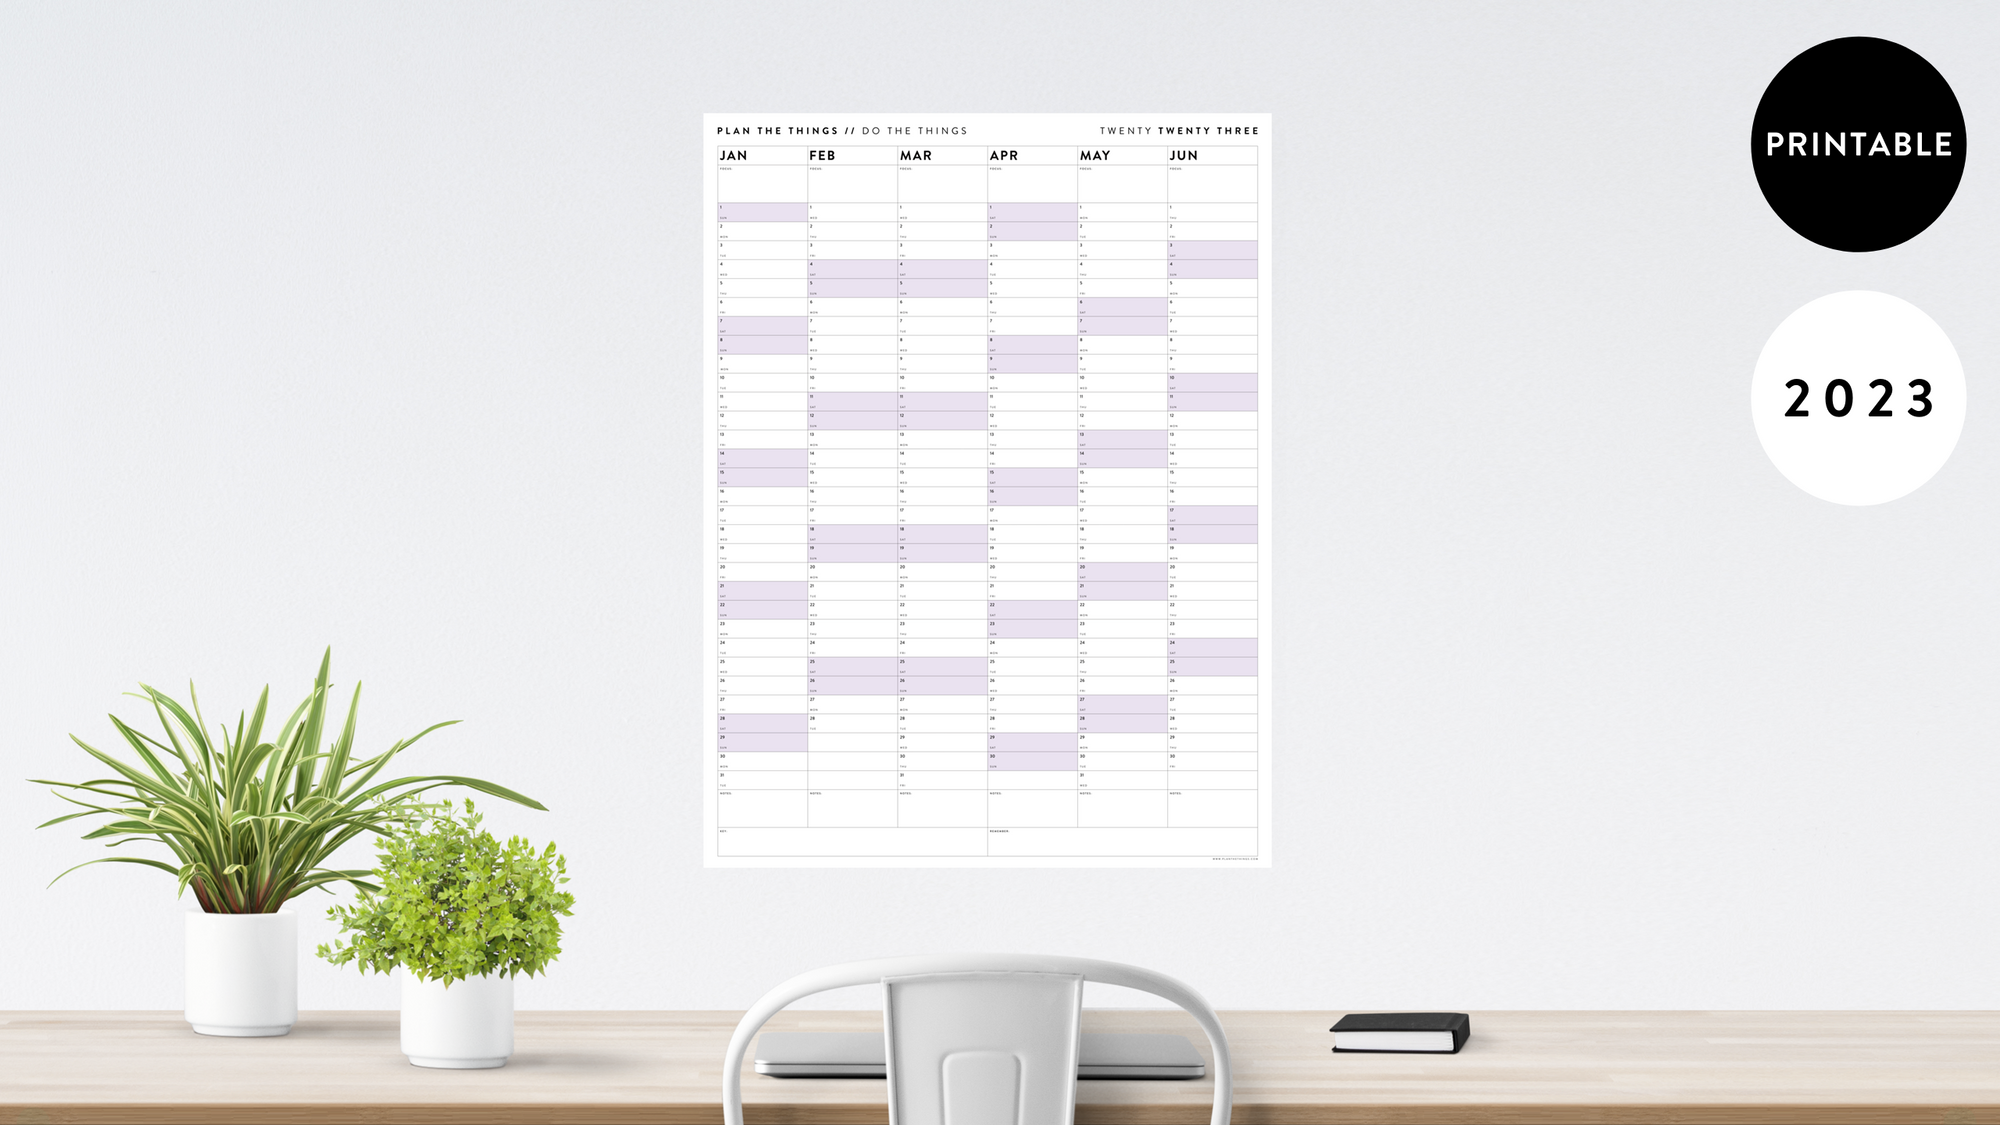 PRINTABLE 2023 SIX MONTH CALENDARS | JANUARY - JUNE // INSTANT DOWNLOAD